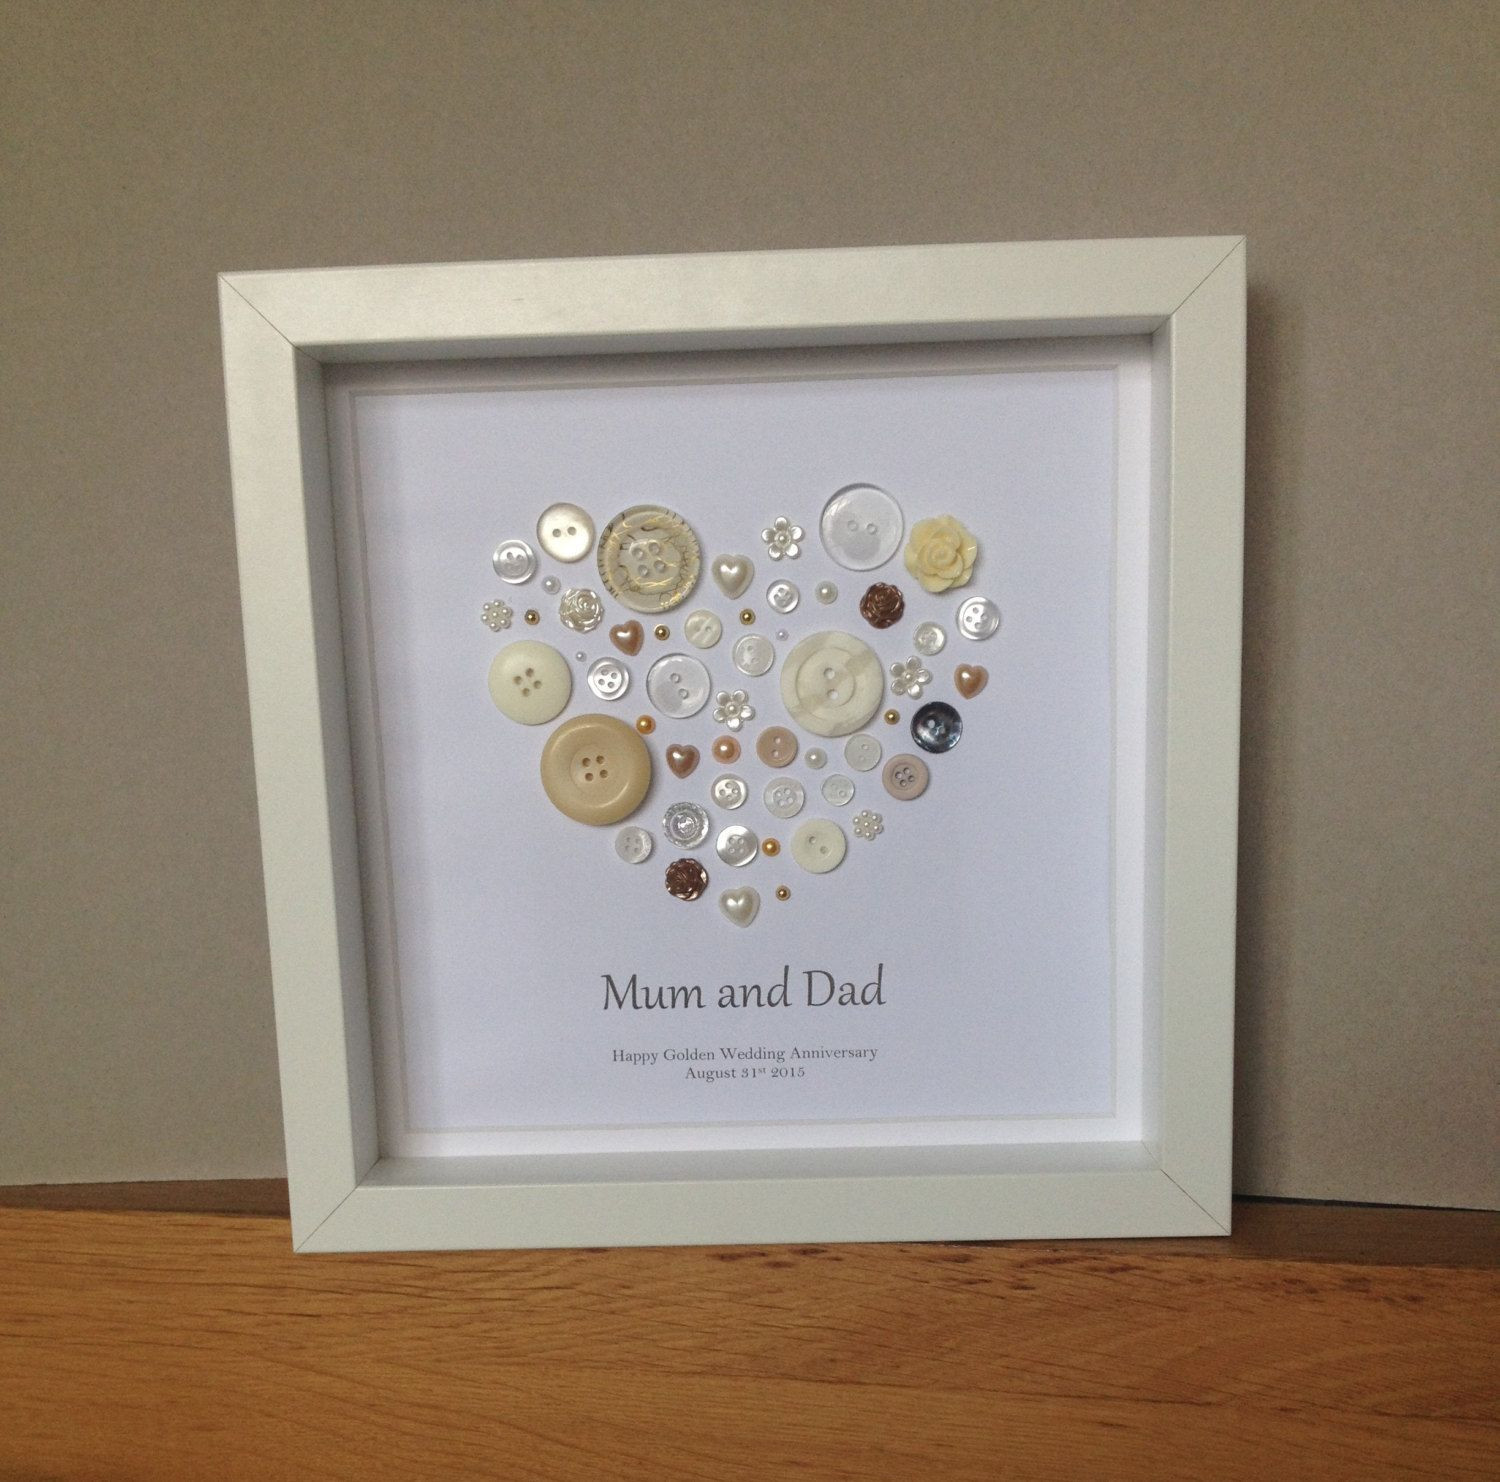 Ideas For 50th Wedding Anniversary Gifts
 Golden Wedding Anniversary Button Art 50th Anniversary